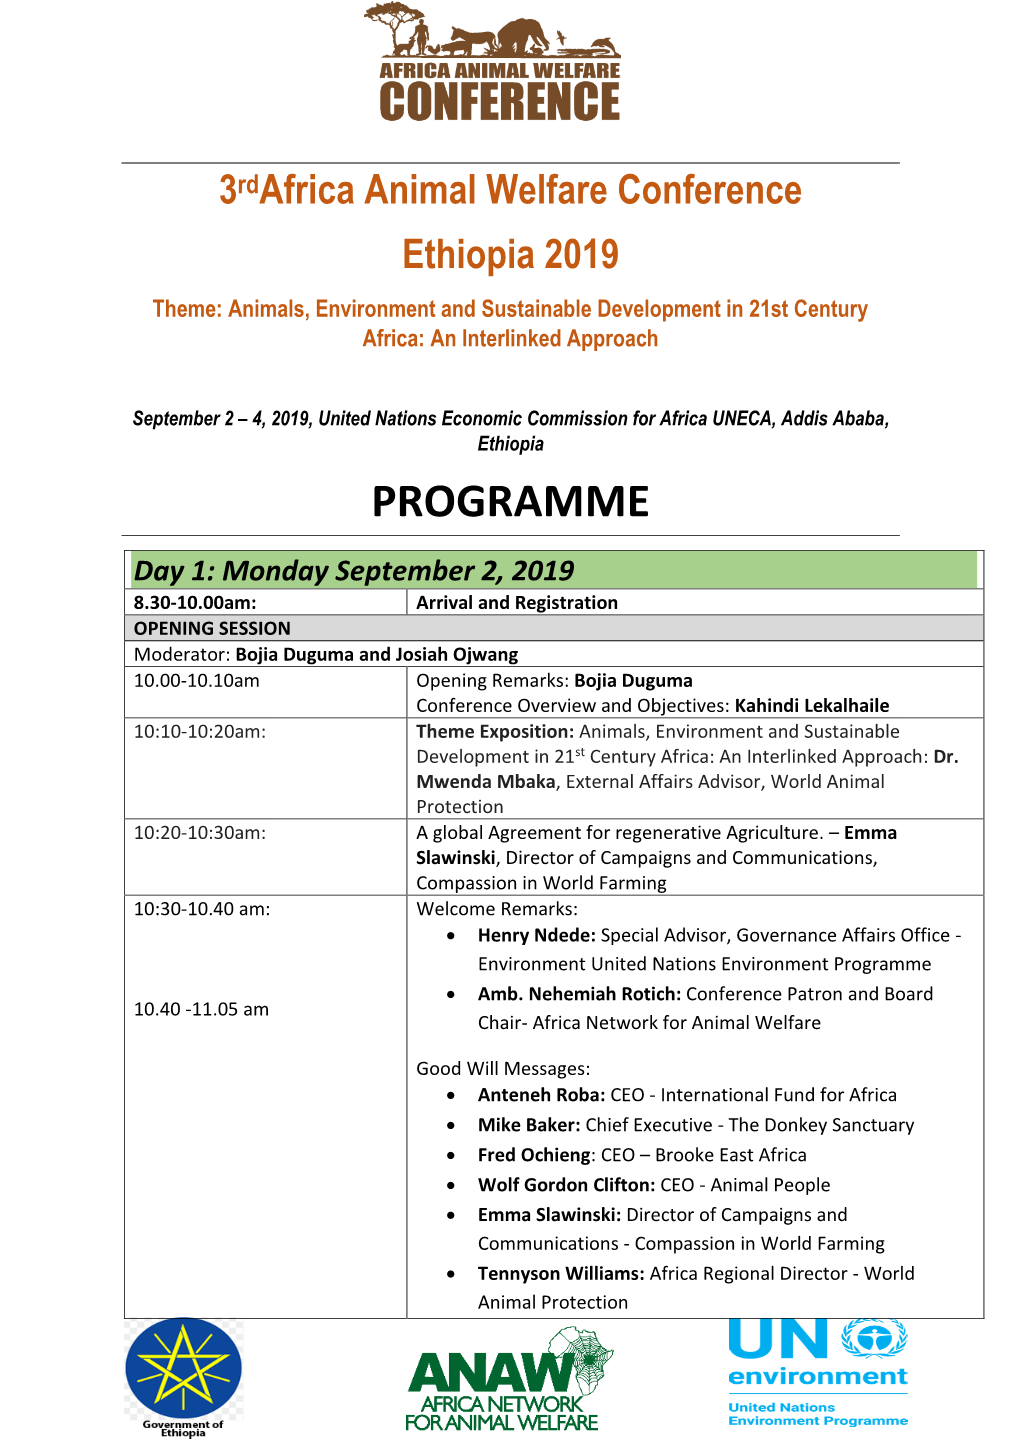 3Rdafrica Animal Welfare Conference Ethiopia 2019 Theme: Animals, Environment and Sustainable Development in 21St Century Africa: an Interlinked Approach